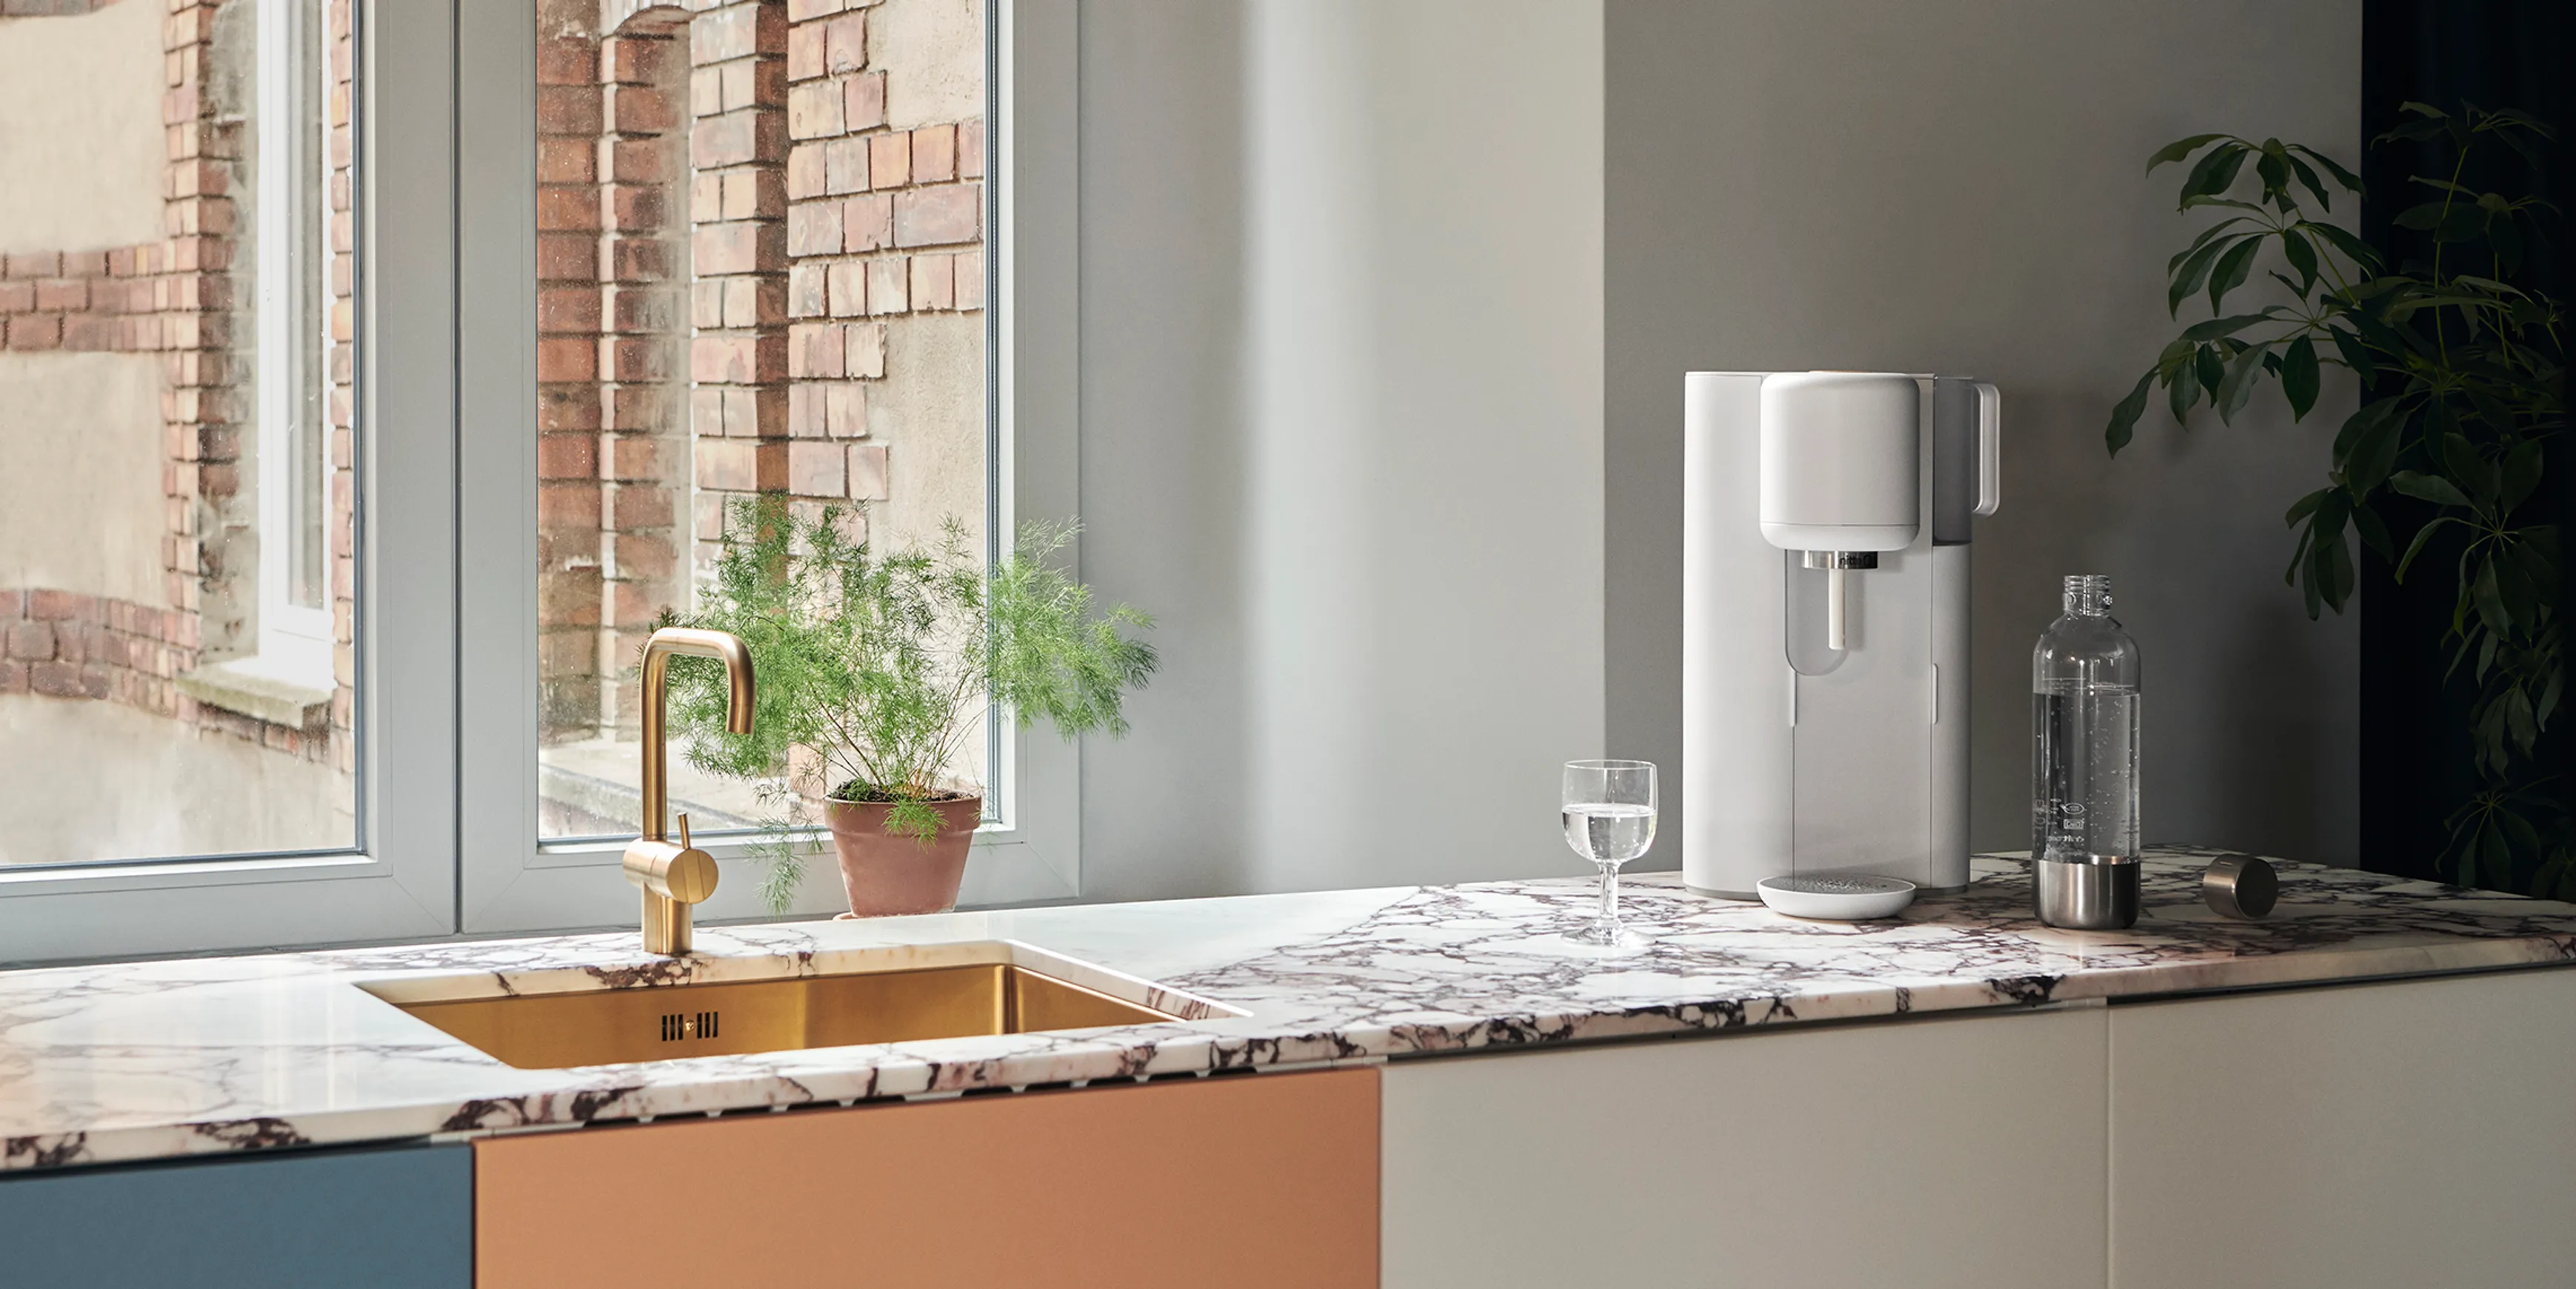 The Mitte water purifier on a colorful kitchen counterop